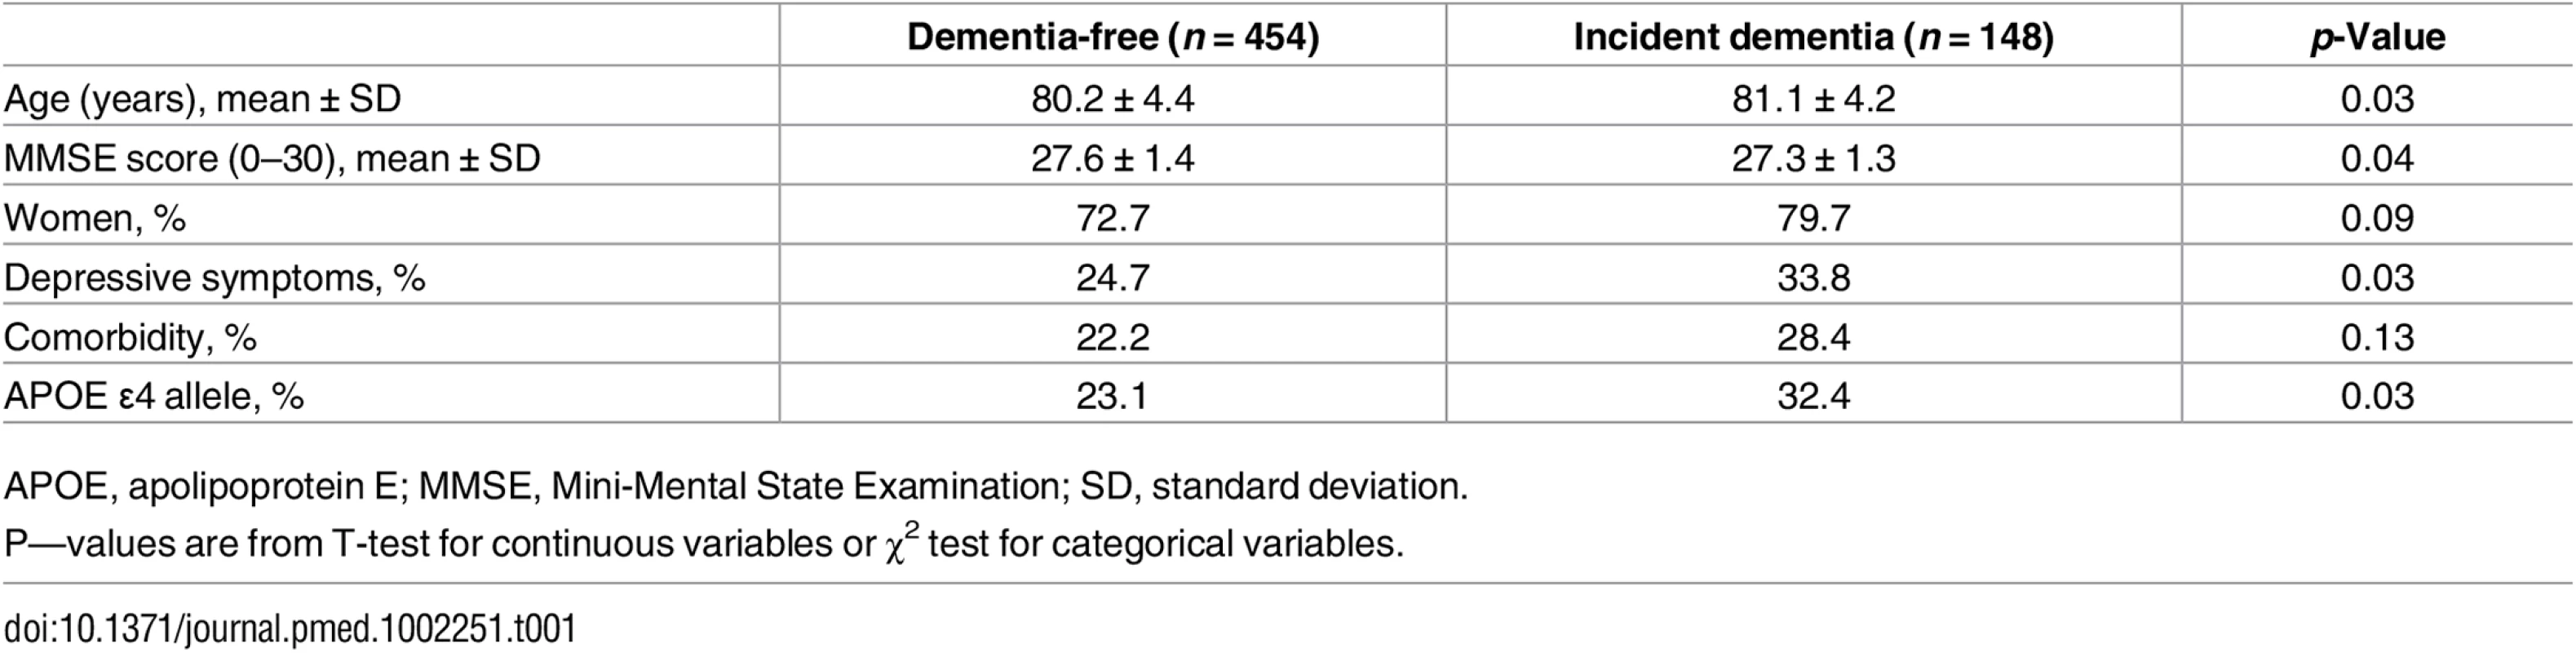 Baseline characteristics of the study population including 454 persons who remained free of dementia during the follow-up and the 148 individuals who developed dementia over an average of 6 y of the follow-up.